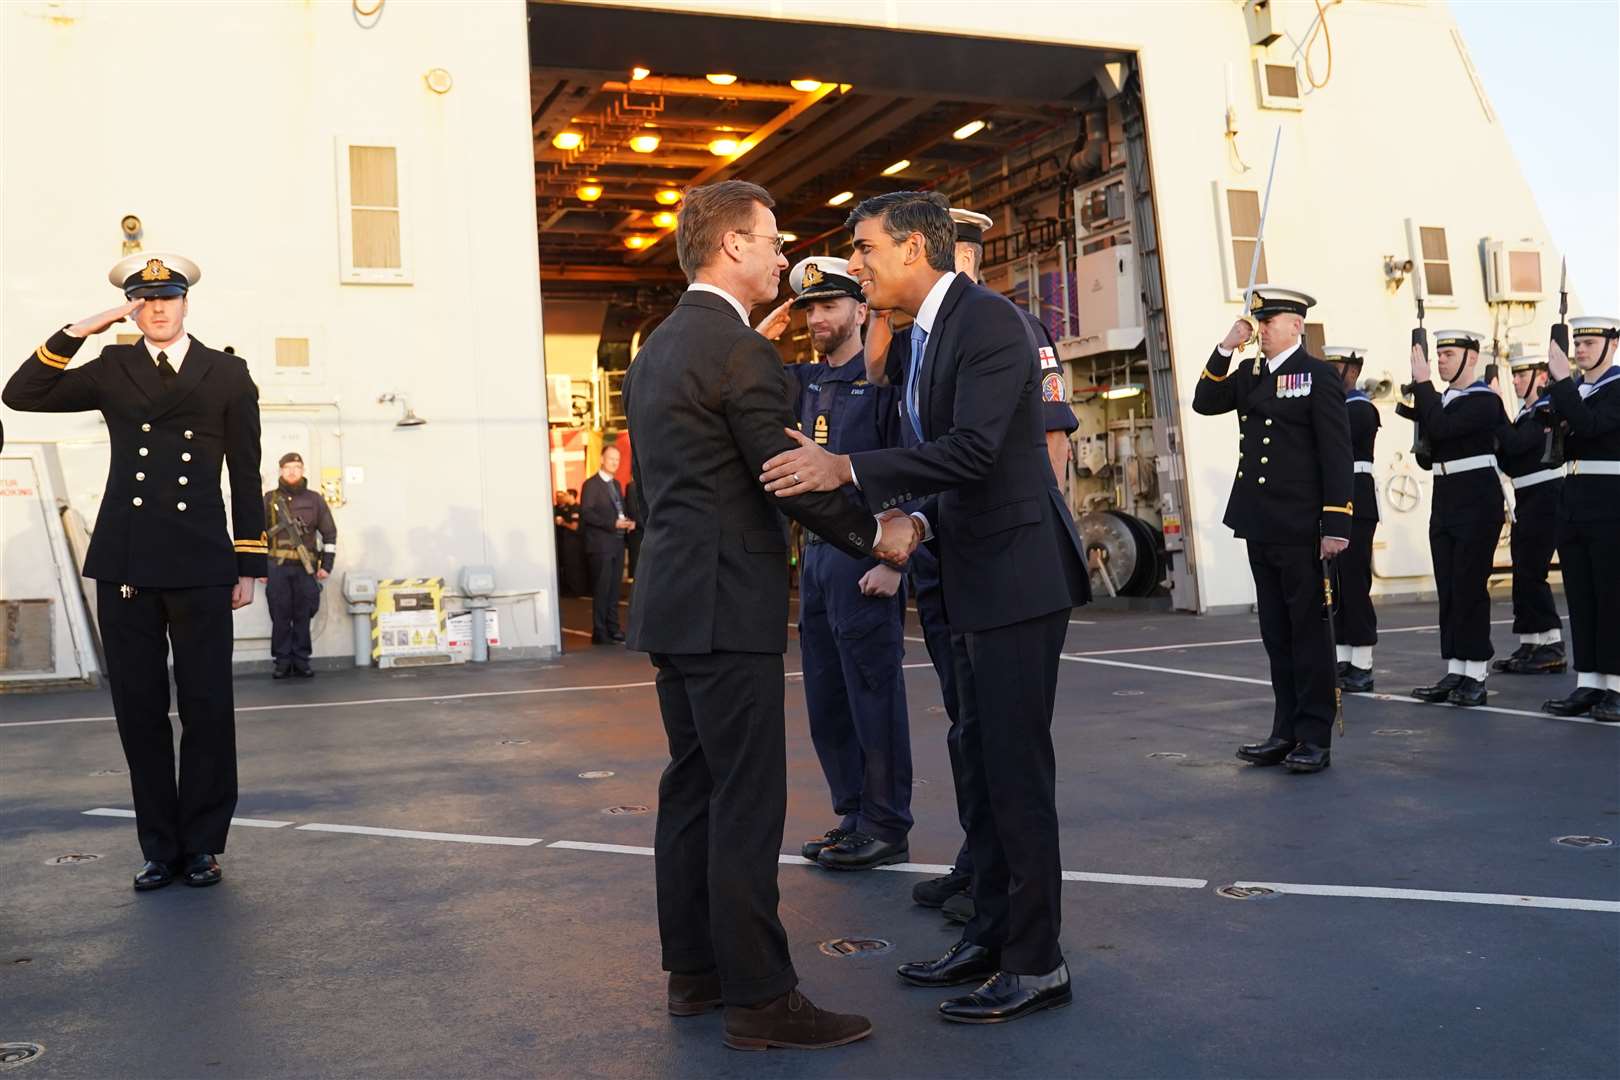 Prime Minister Rishi Sunak welcomes Ulf Kristersson, Prime Minister of Sweden, on board HMS Diamond (Stefan Rousseau/PA)